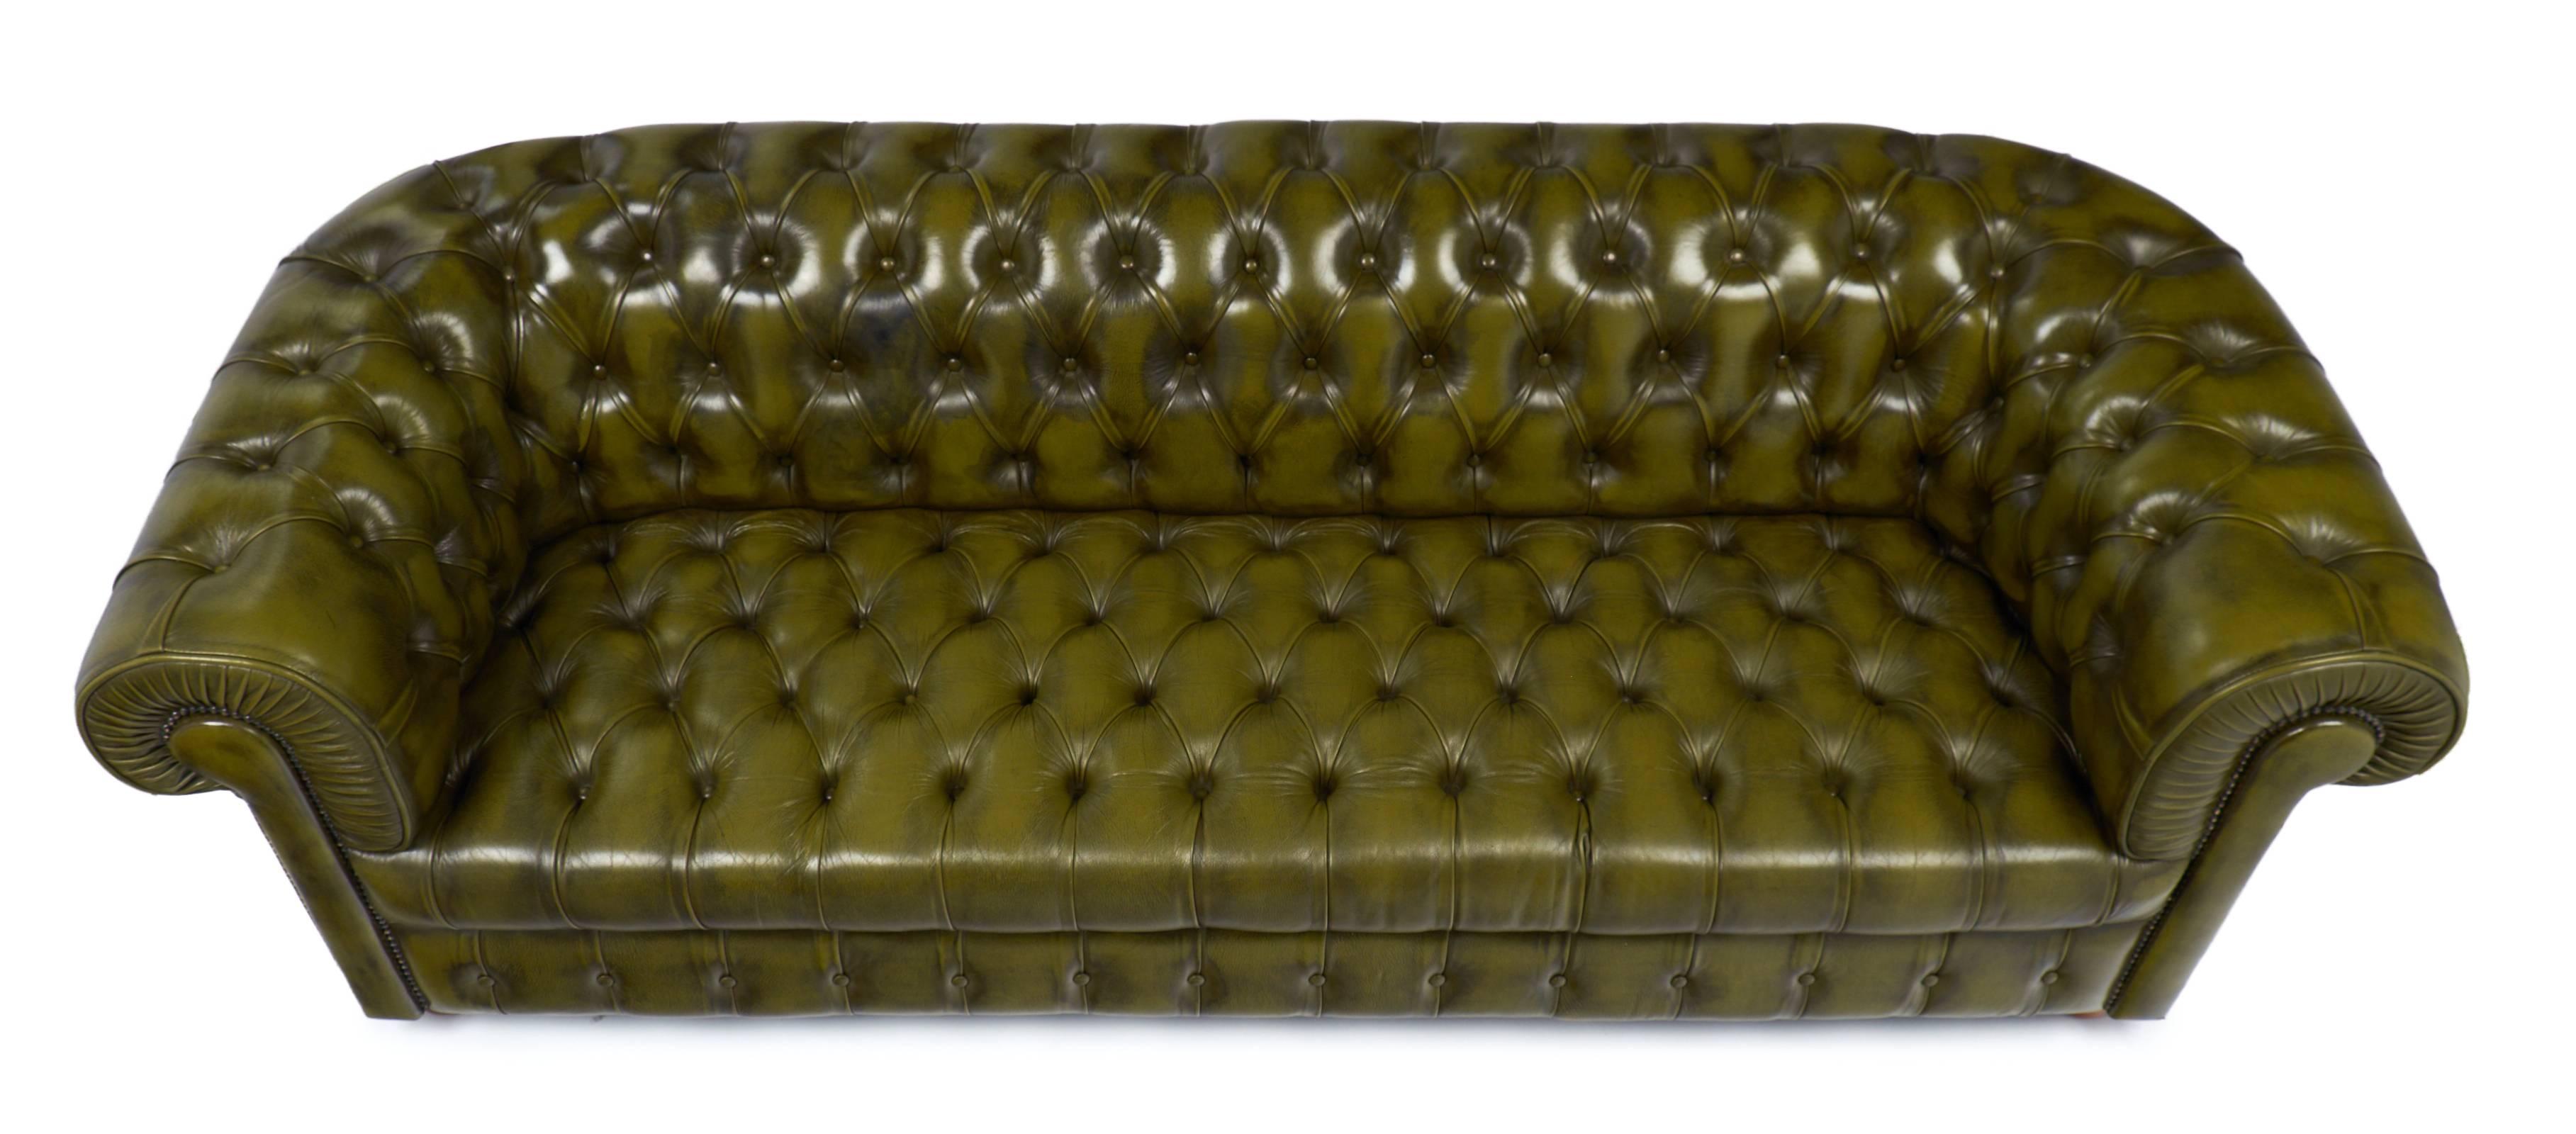 green vintage chesterfield sofa